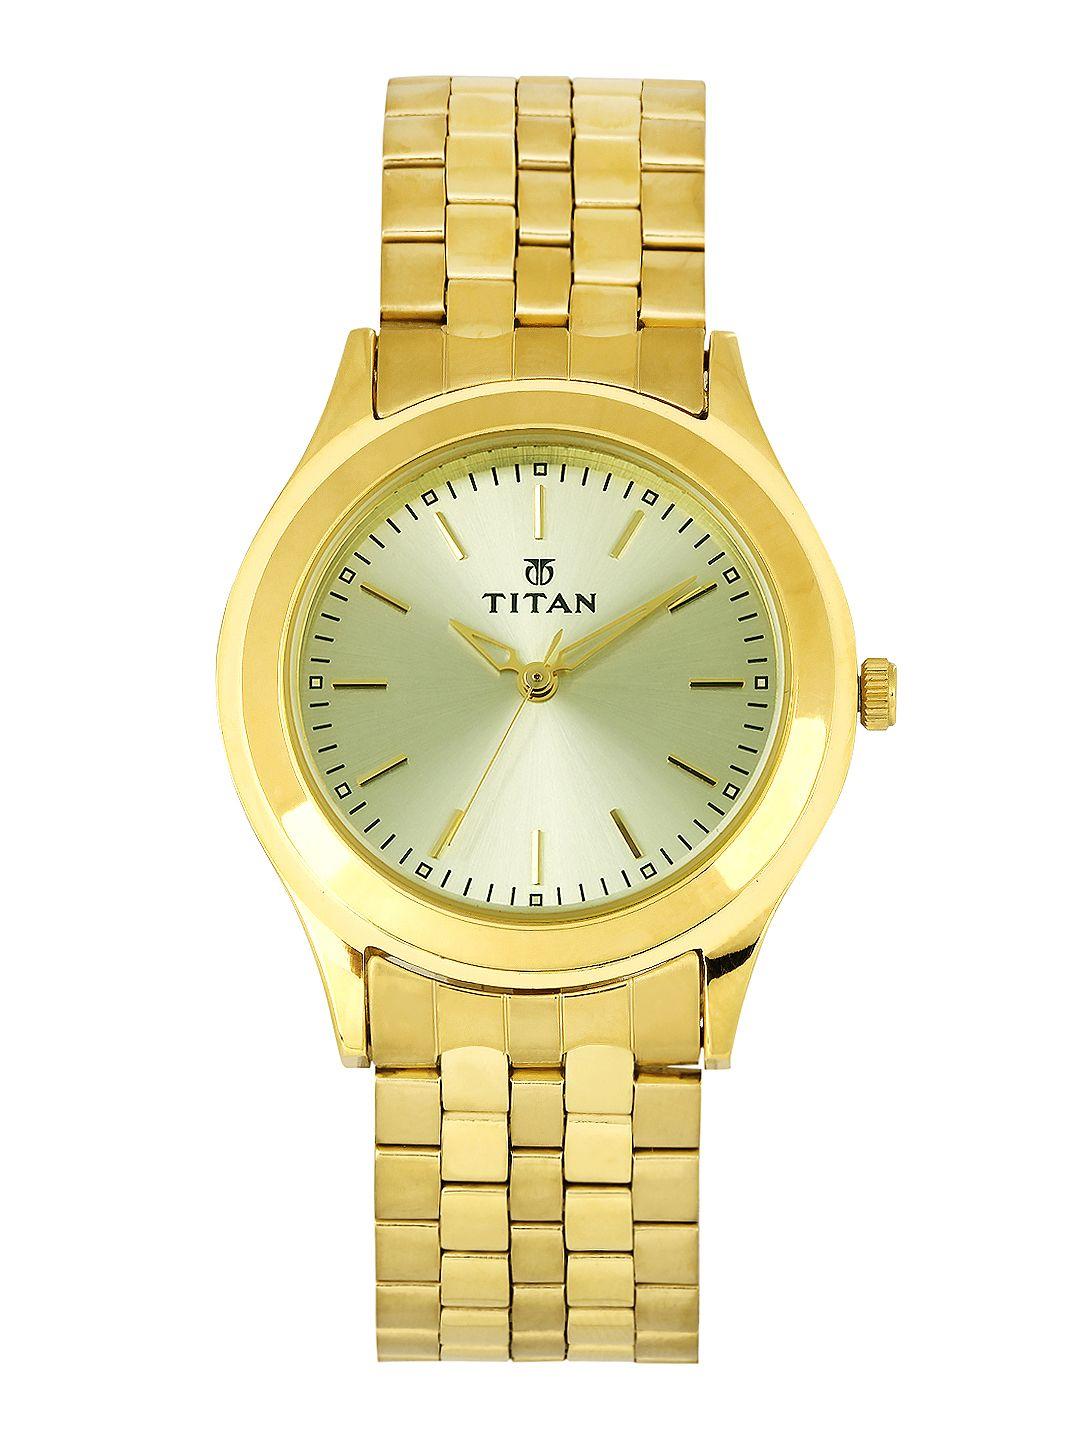 titan men muted gold-toned dial watch 1648ym02